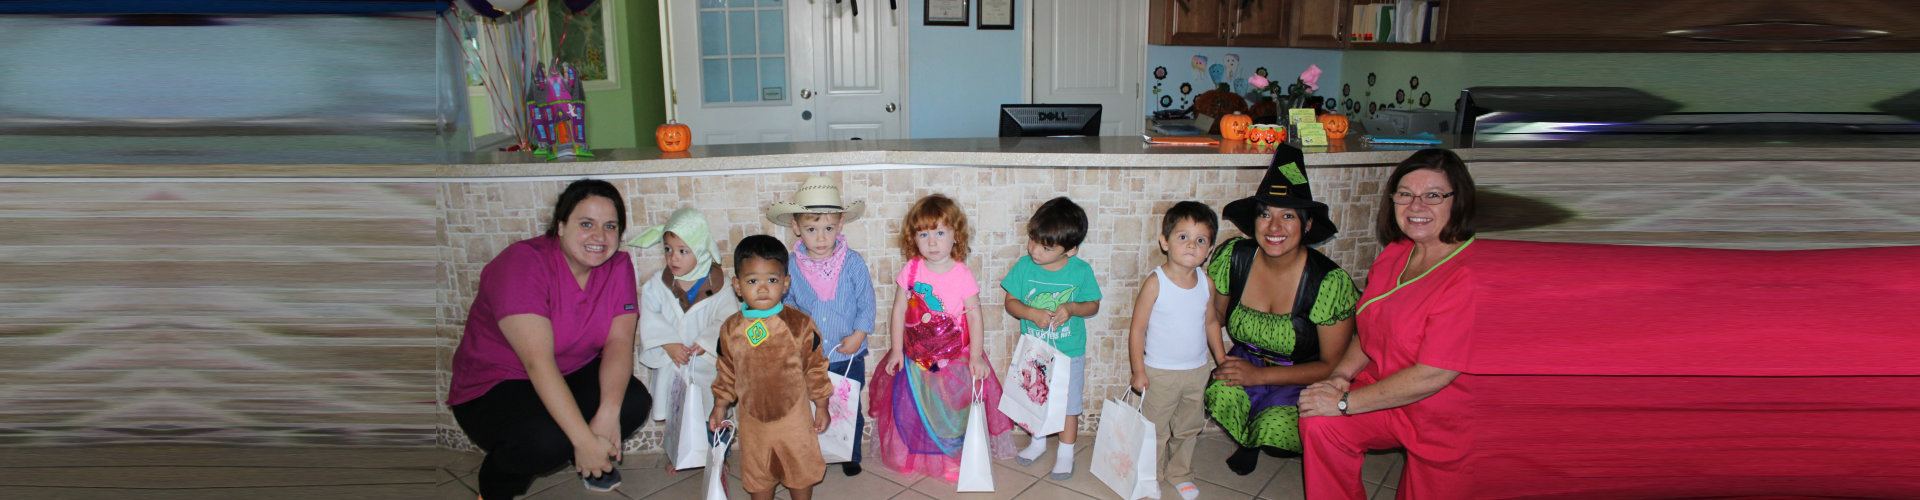 kids having a haloween party